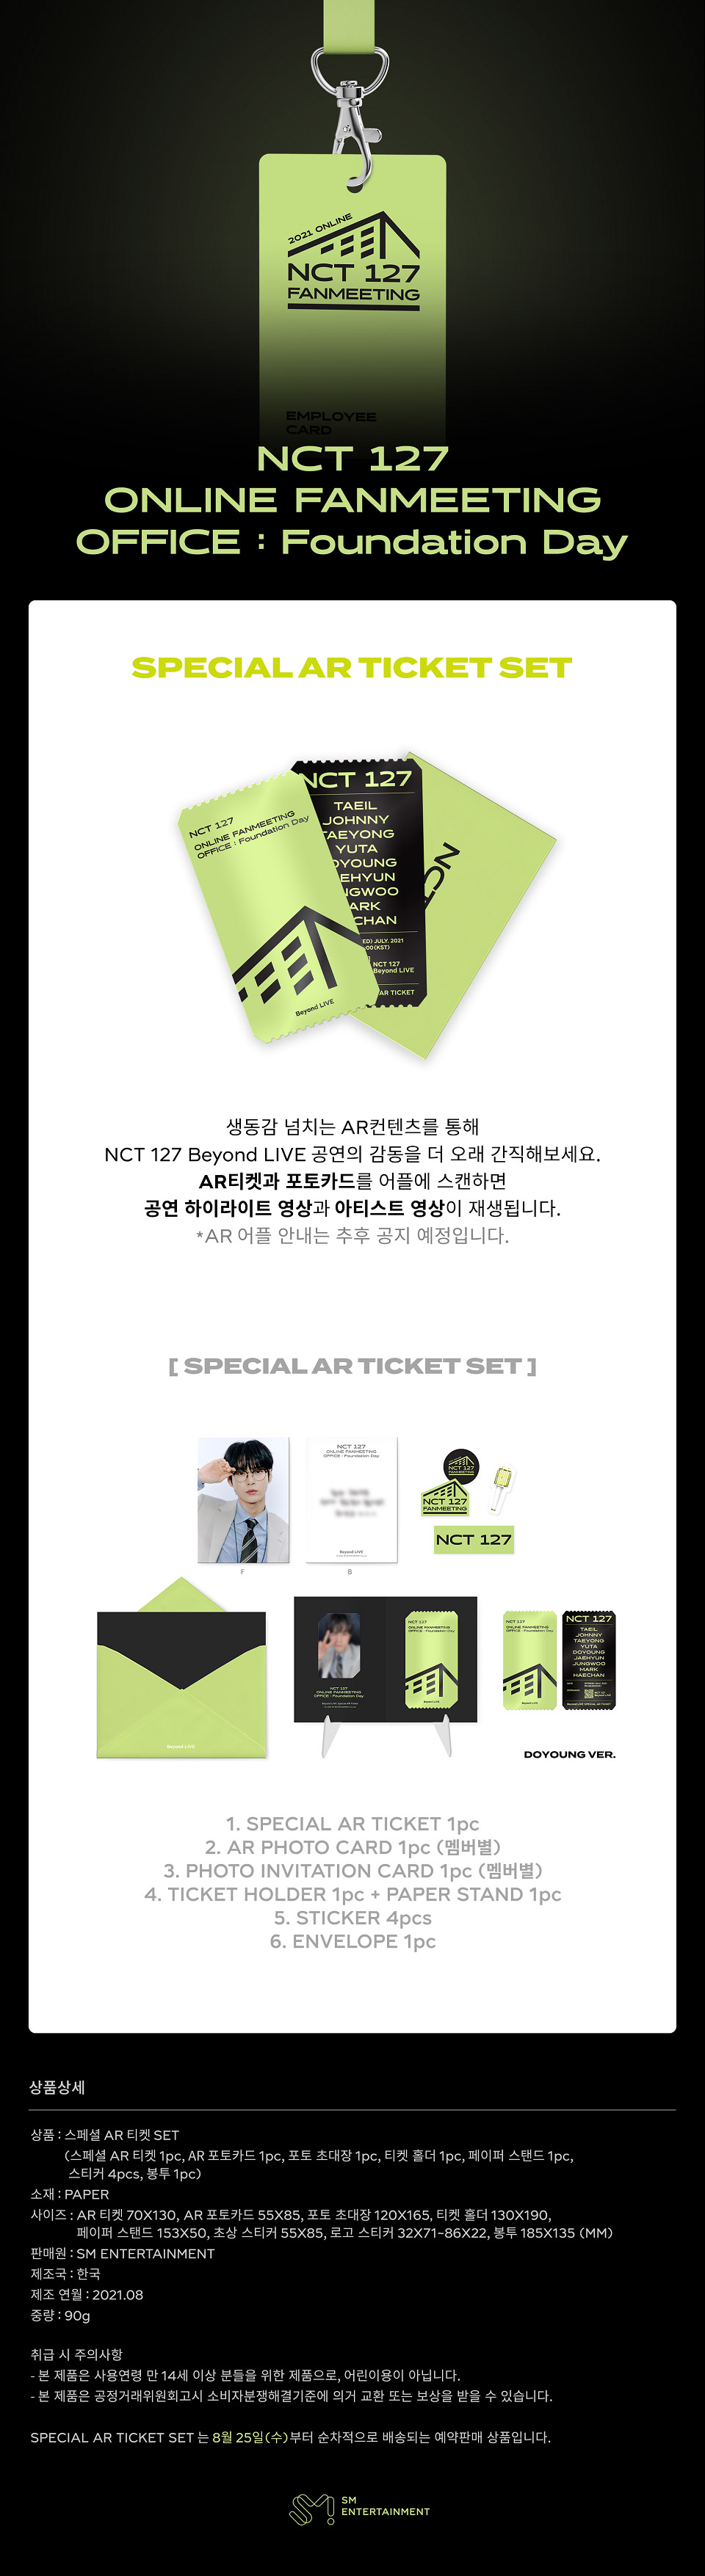 NCT 127 Foundation Day Goods - SPECIAL AR TICKET SET